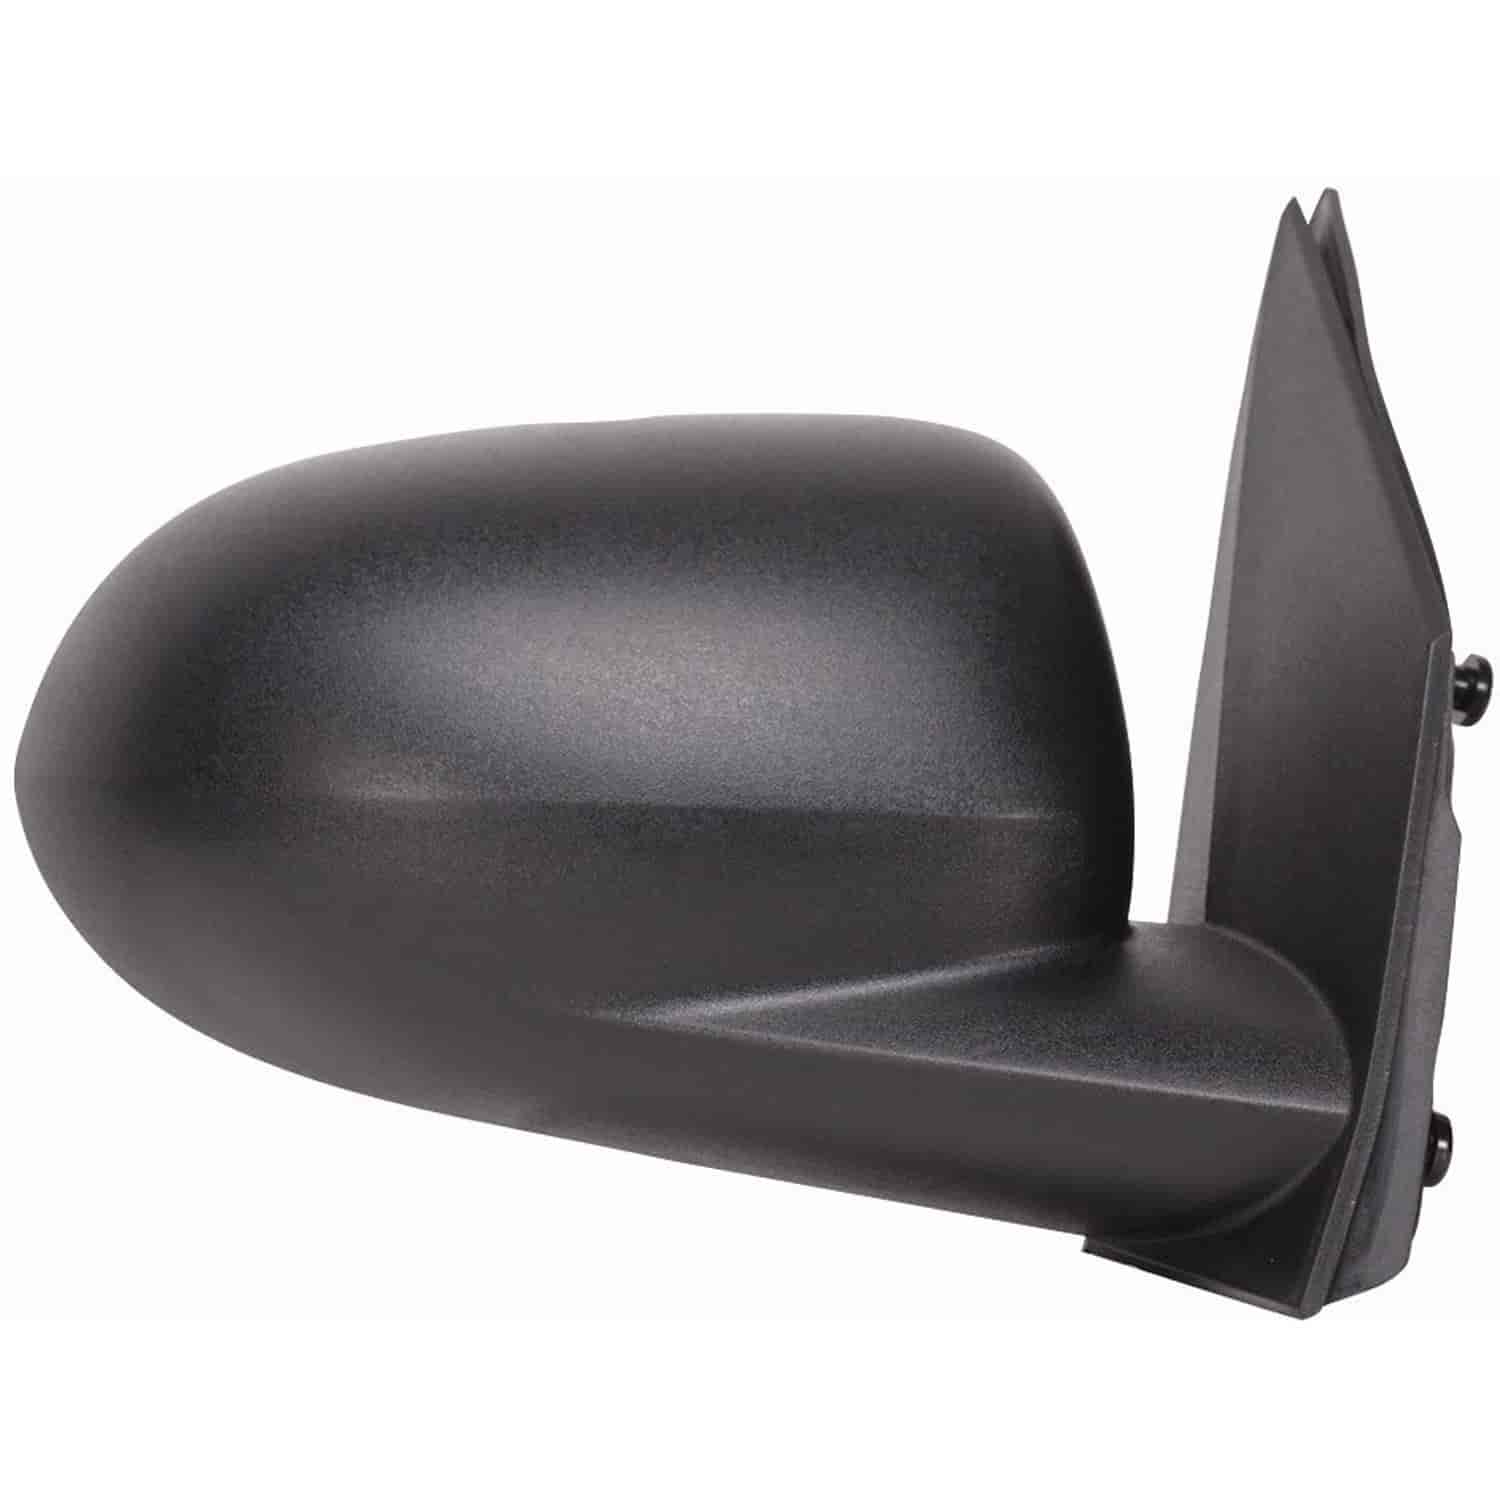 OEM Style Replacement mirror for 07-12 Dodge Caliber passenger side mirror tested to fit and functio